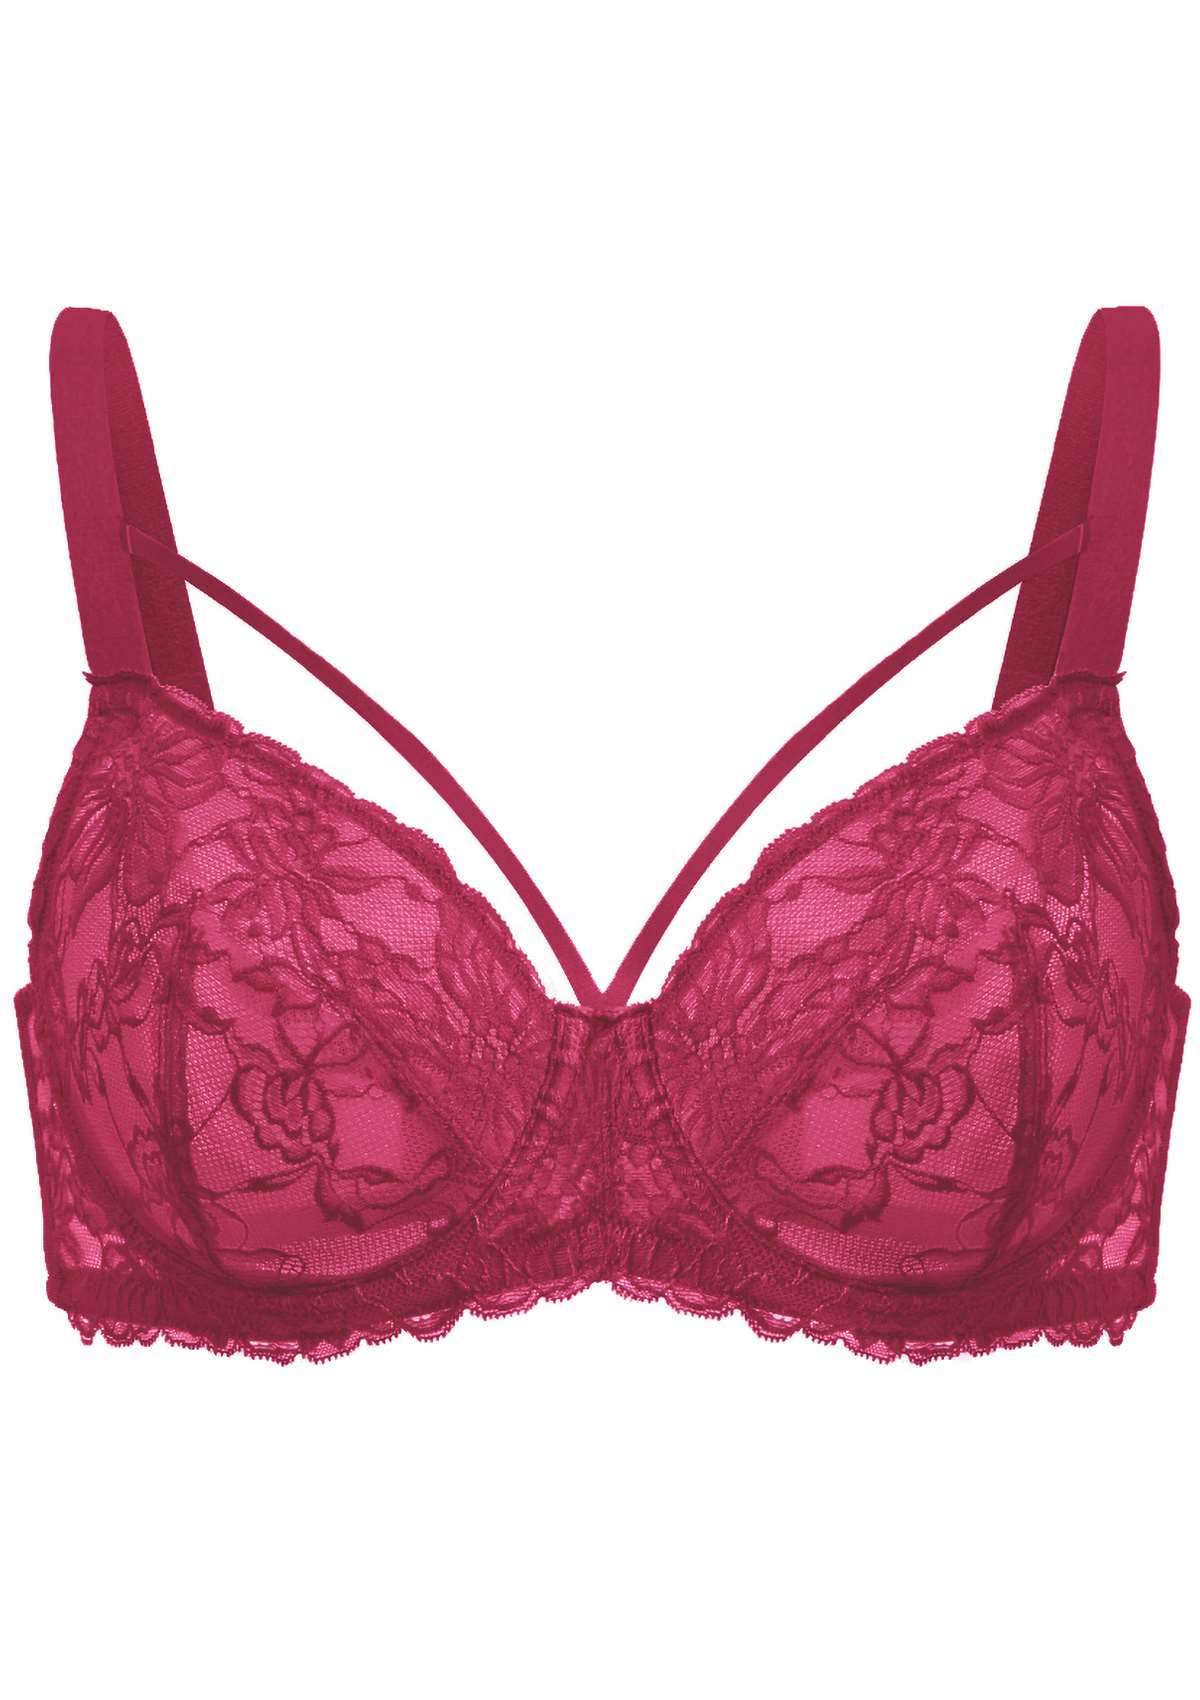 HSIA Pretty In Petals Sexy Lace Bra: Full Coverage Back Smoothing Bra - Copper Red / 36 / C